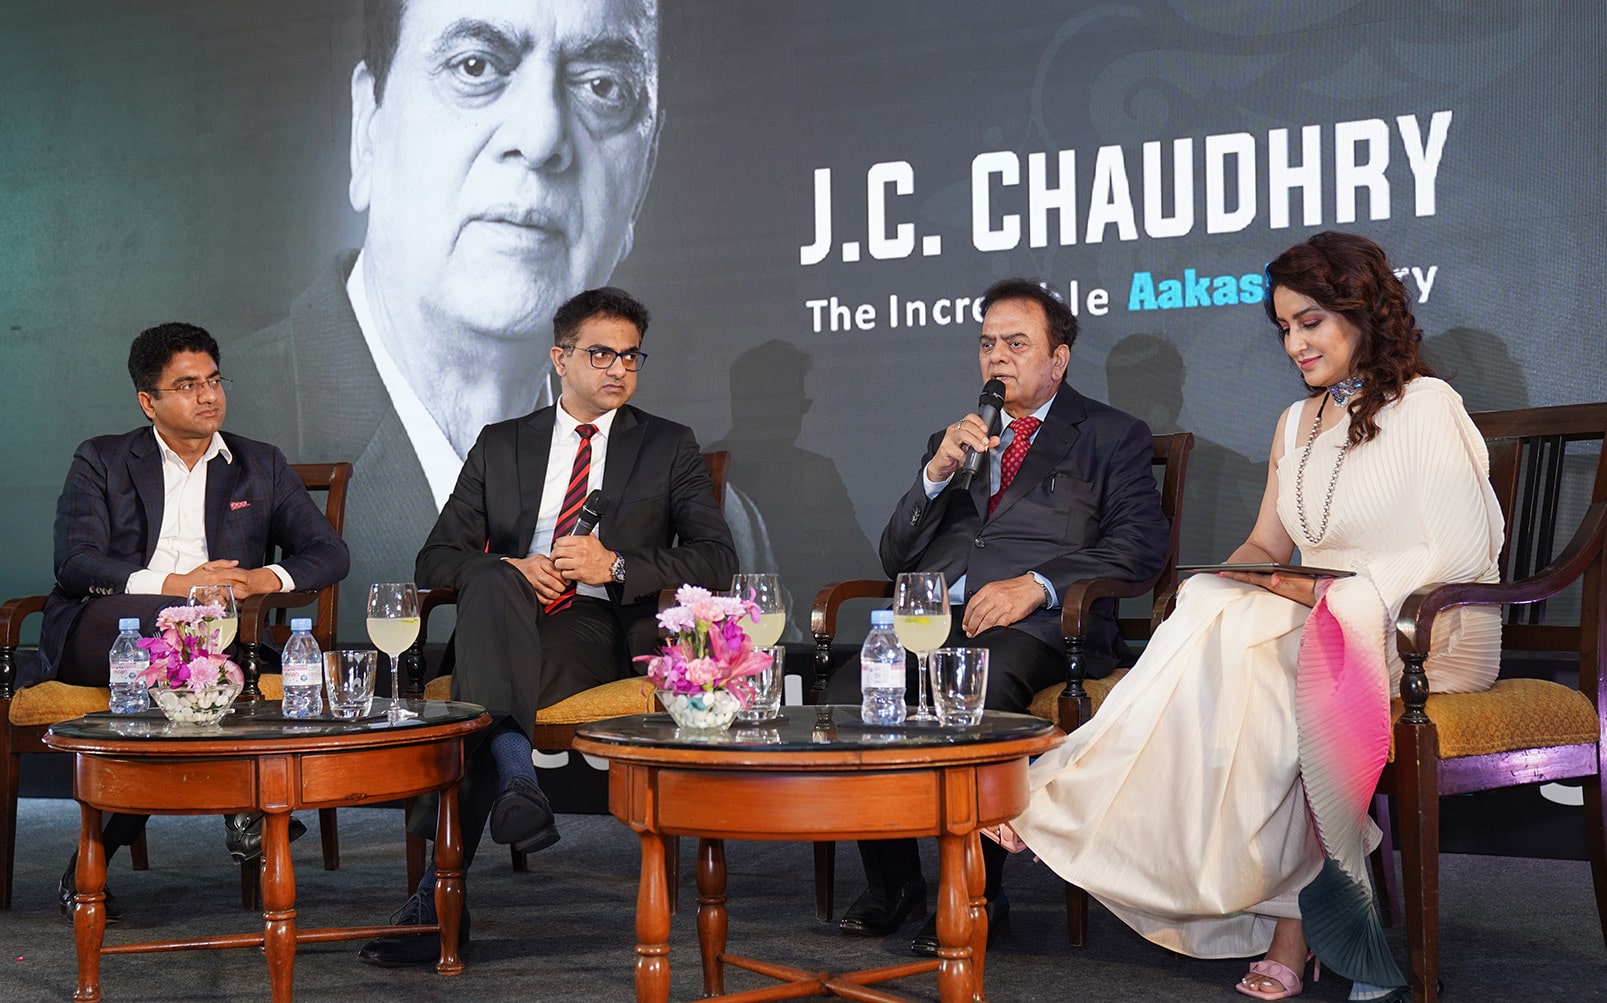 J C chaudhry, Aakash Chaudhry, Aashish Chaudhry Panel Discussion